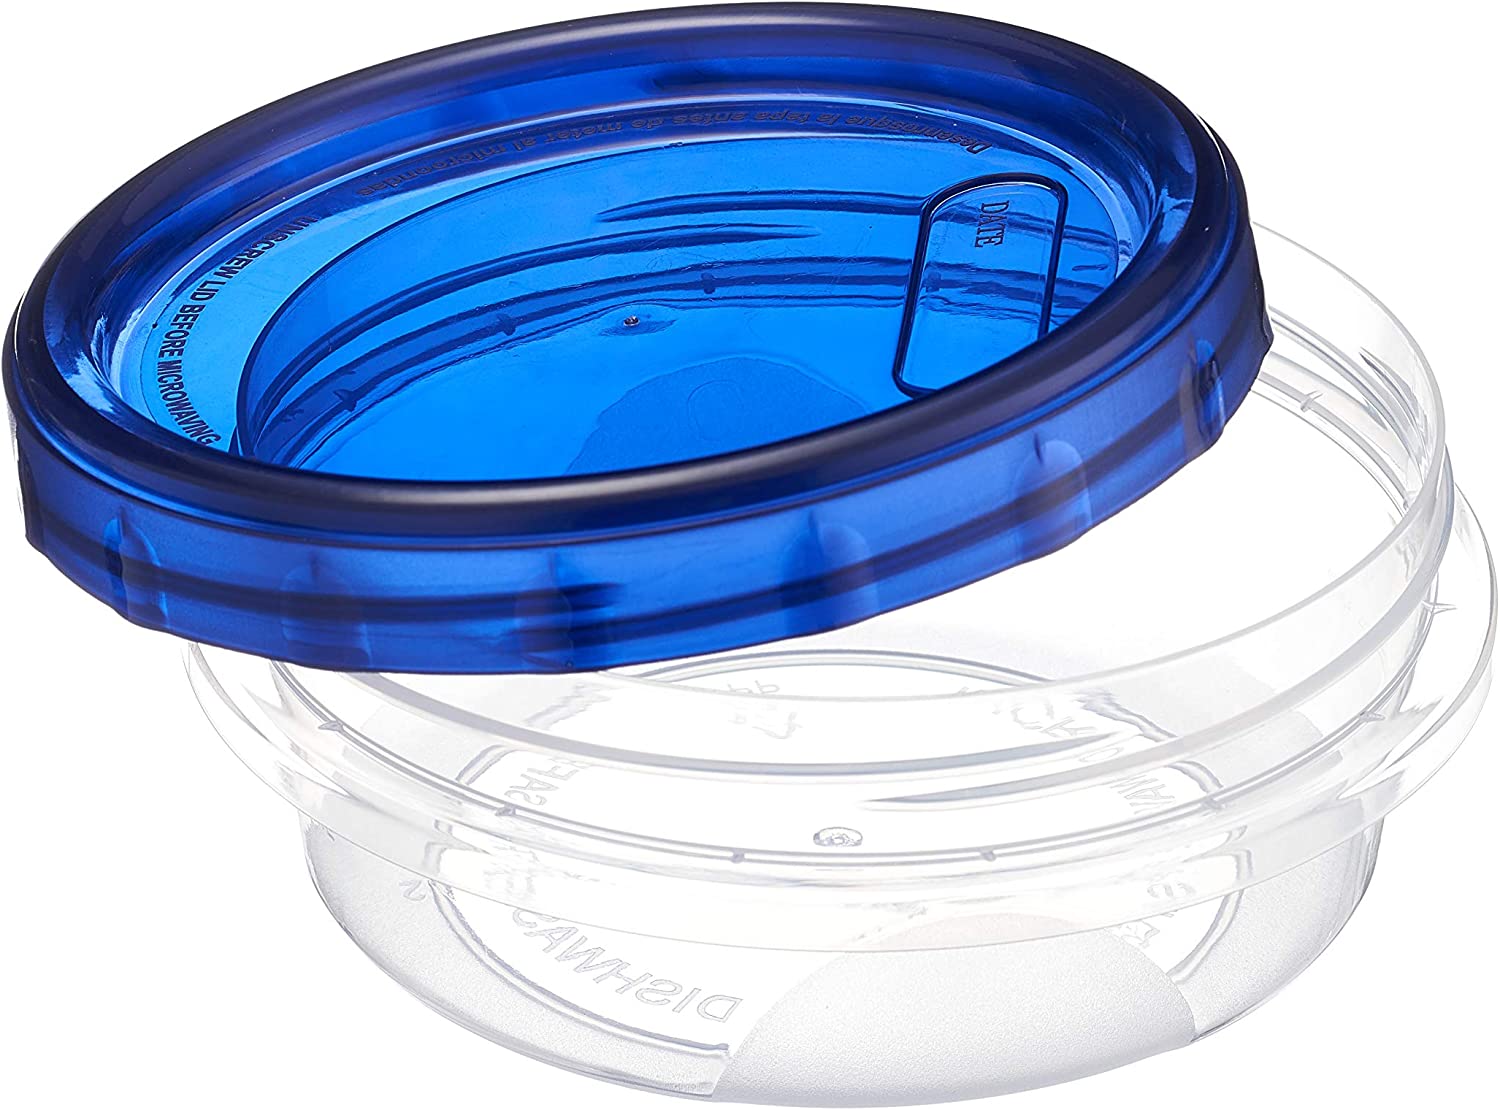 Twist Top twist seal Togo Container Take out Containers supply storage Storage Containers Stackable Container spices container Soup Containers with Plastic Lids plastic soup containers Soup Containers with Plastic Lids Snack Container Plastic Lunch Container Microwave safe microwavable container meal prep containers ingredient container Ingredient Bin Freezer Safe Food Storage Container Food Canisters Deli Containers